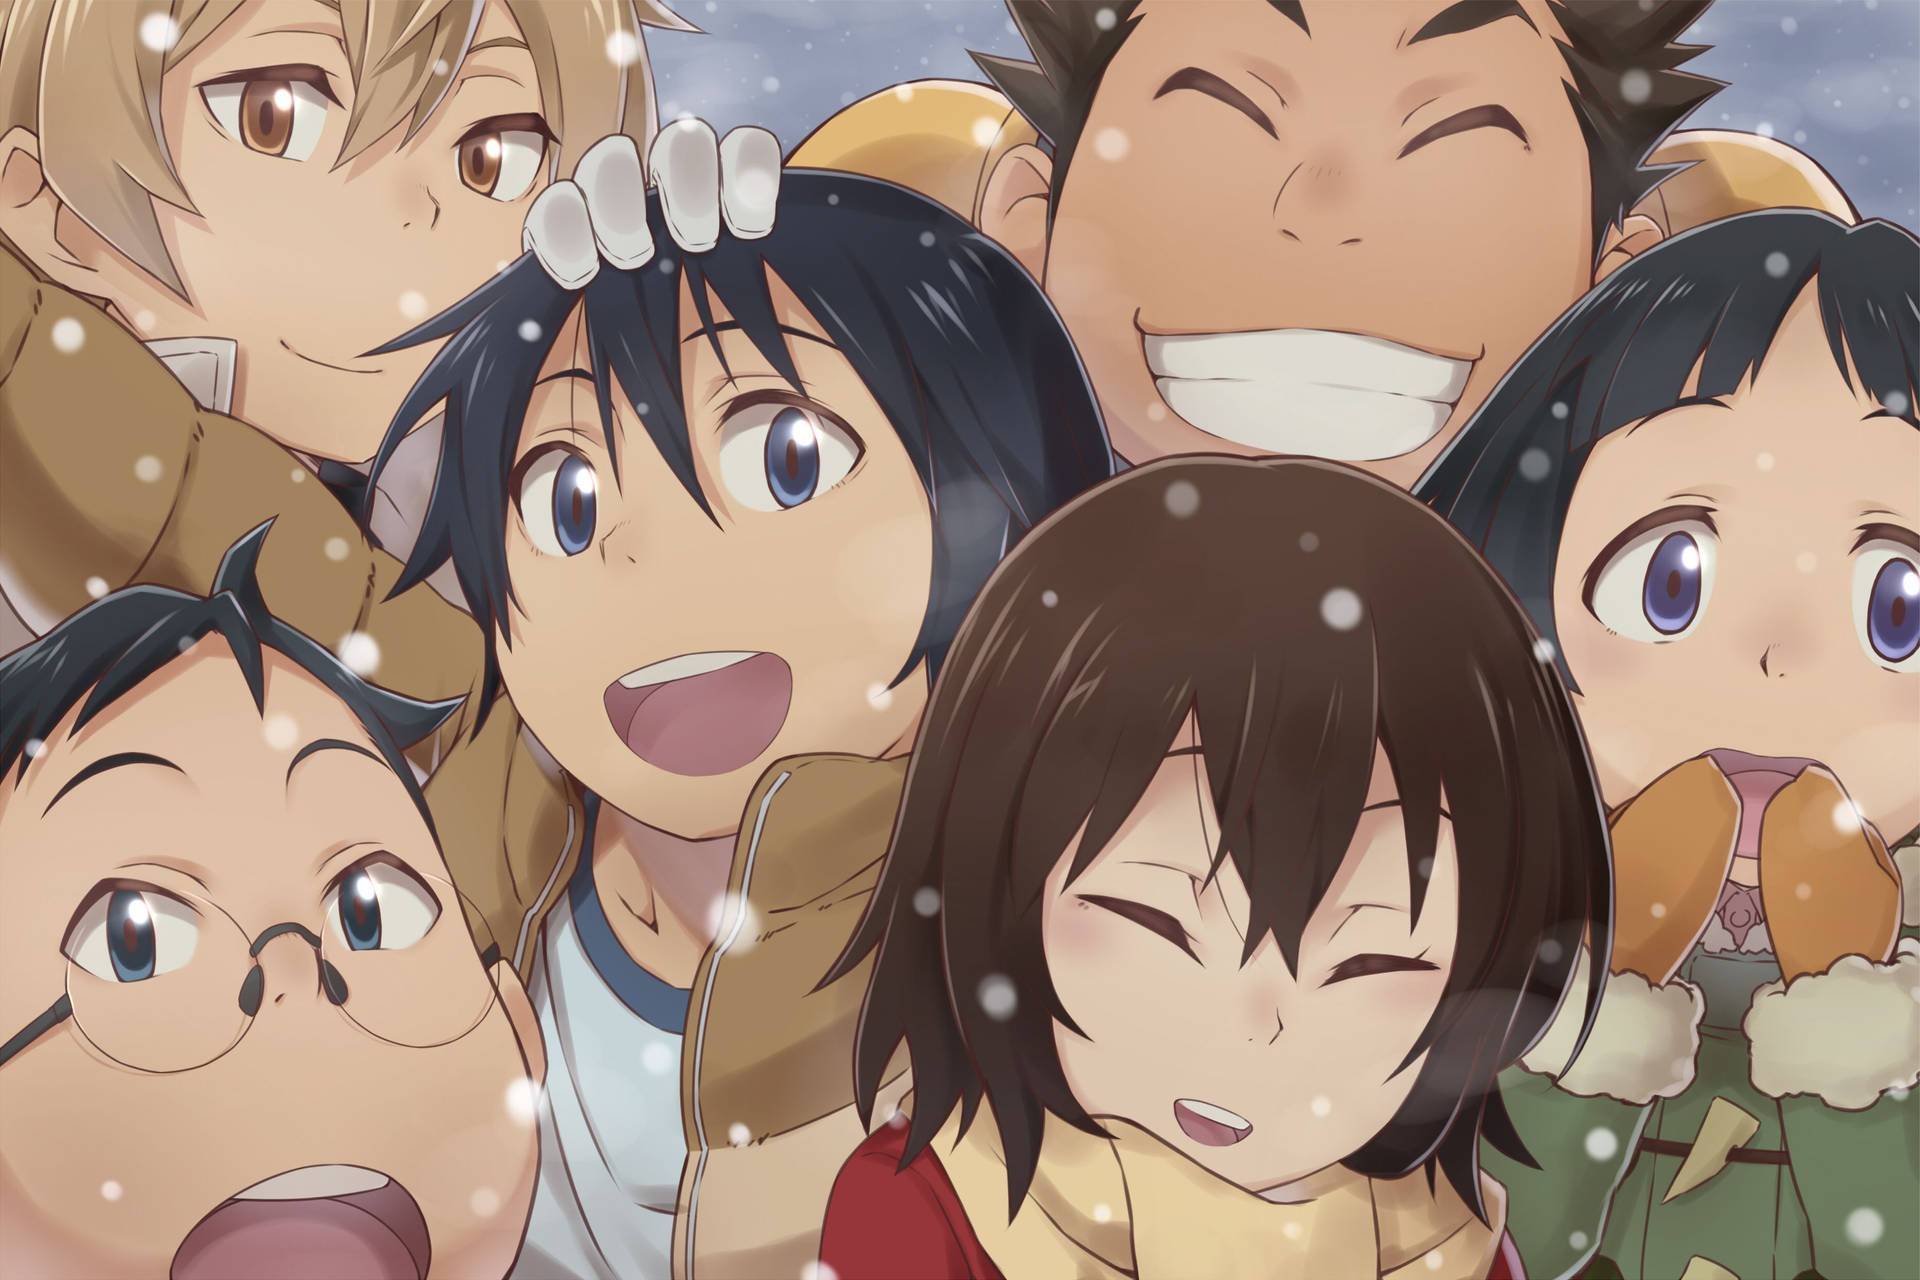 Group Of Characters In Erased Background